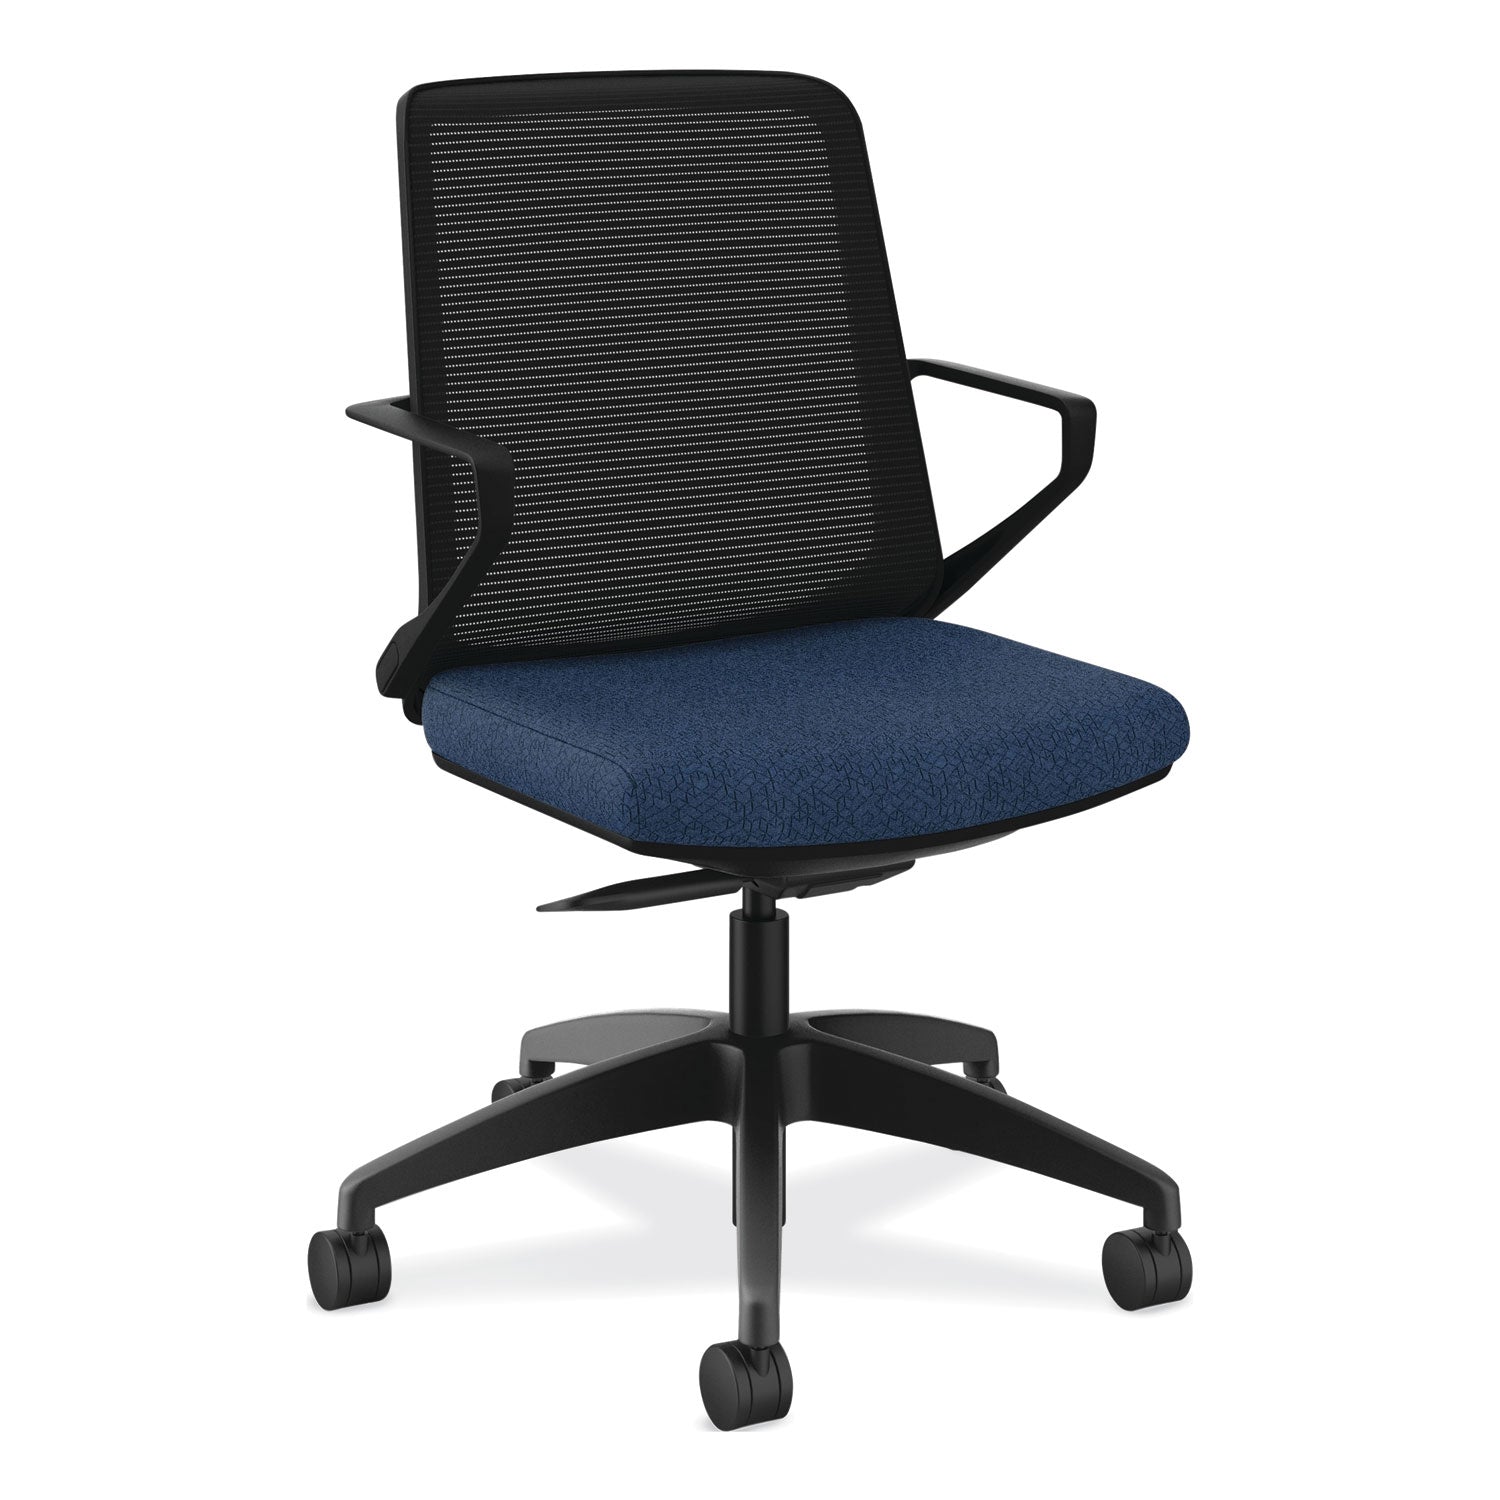 cliq-office-chair-supports-up-to-300-lb-17-to-22-seat-height-navy-seat-black-back-base-ships-in-7-10-business-days_honclqimapx13t - 1